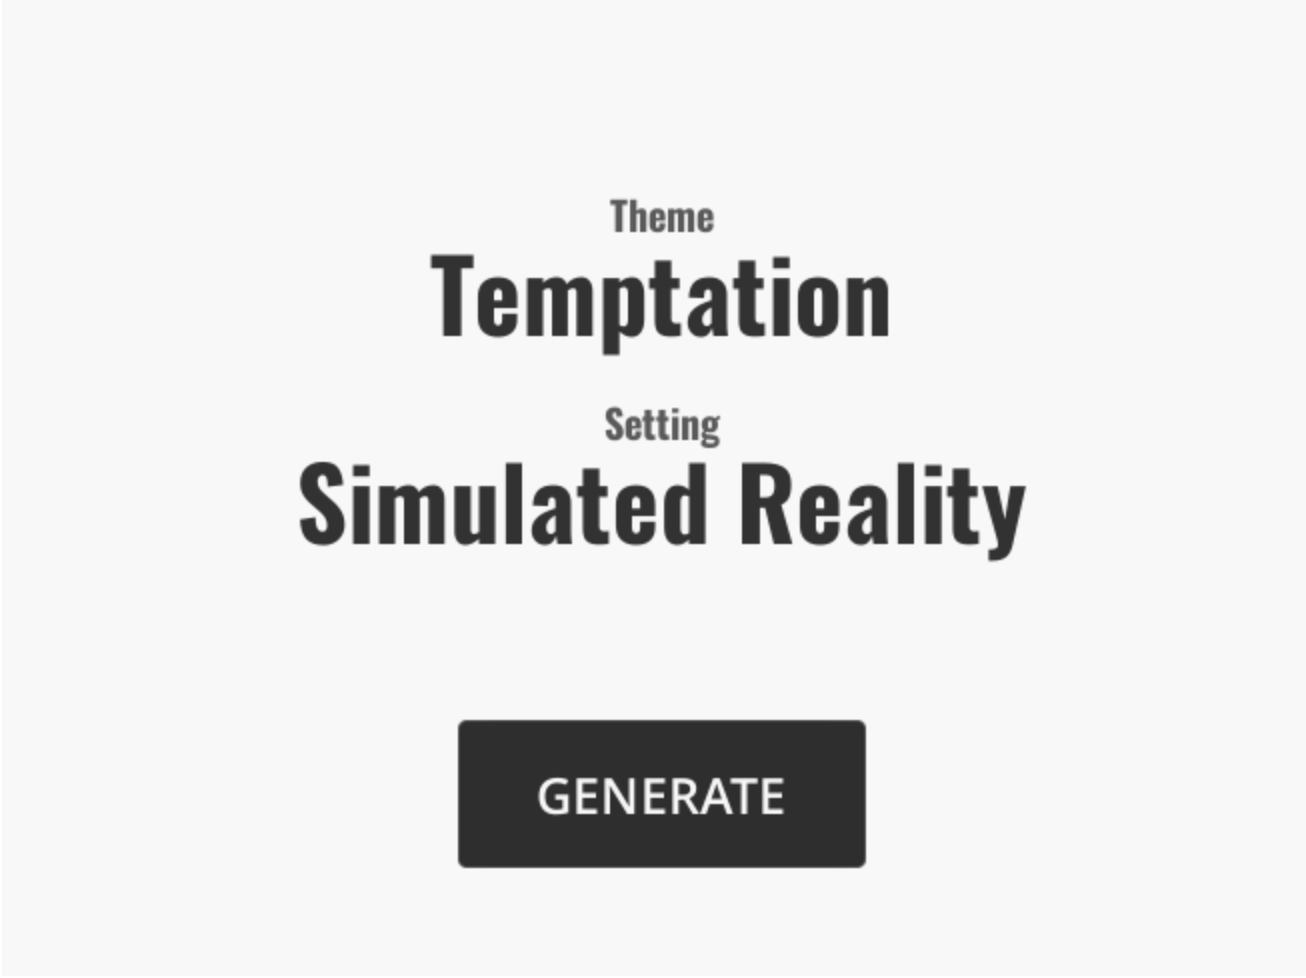 Related Content: Story Theme and Setting Generator